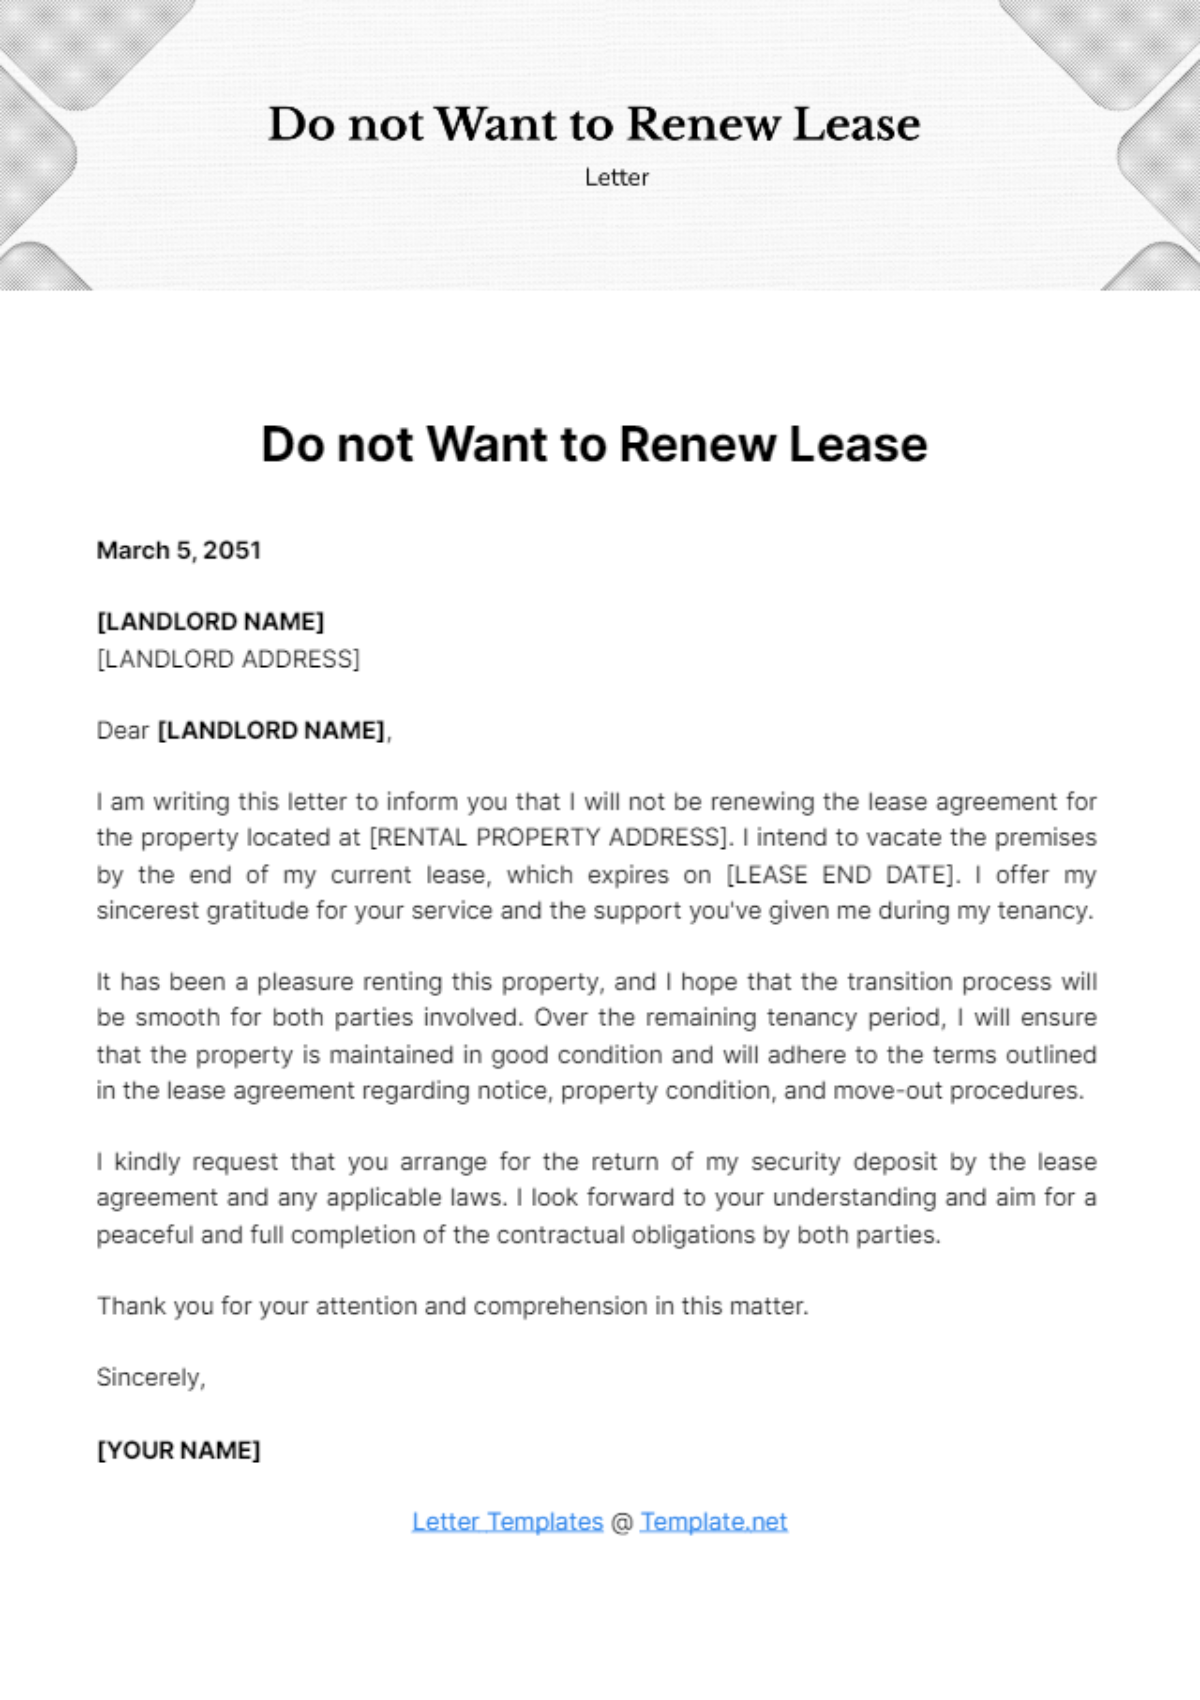 Do not Want to Renew Lease Letter Template